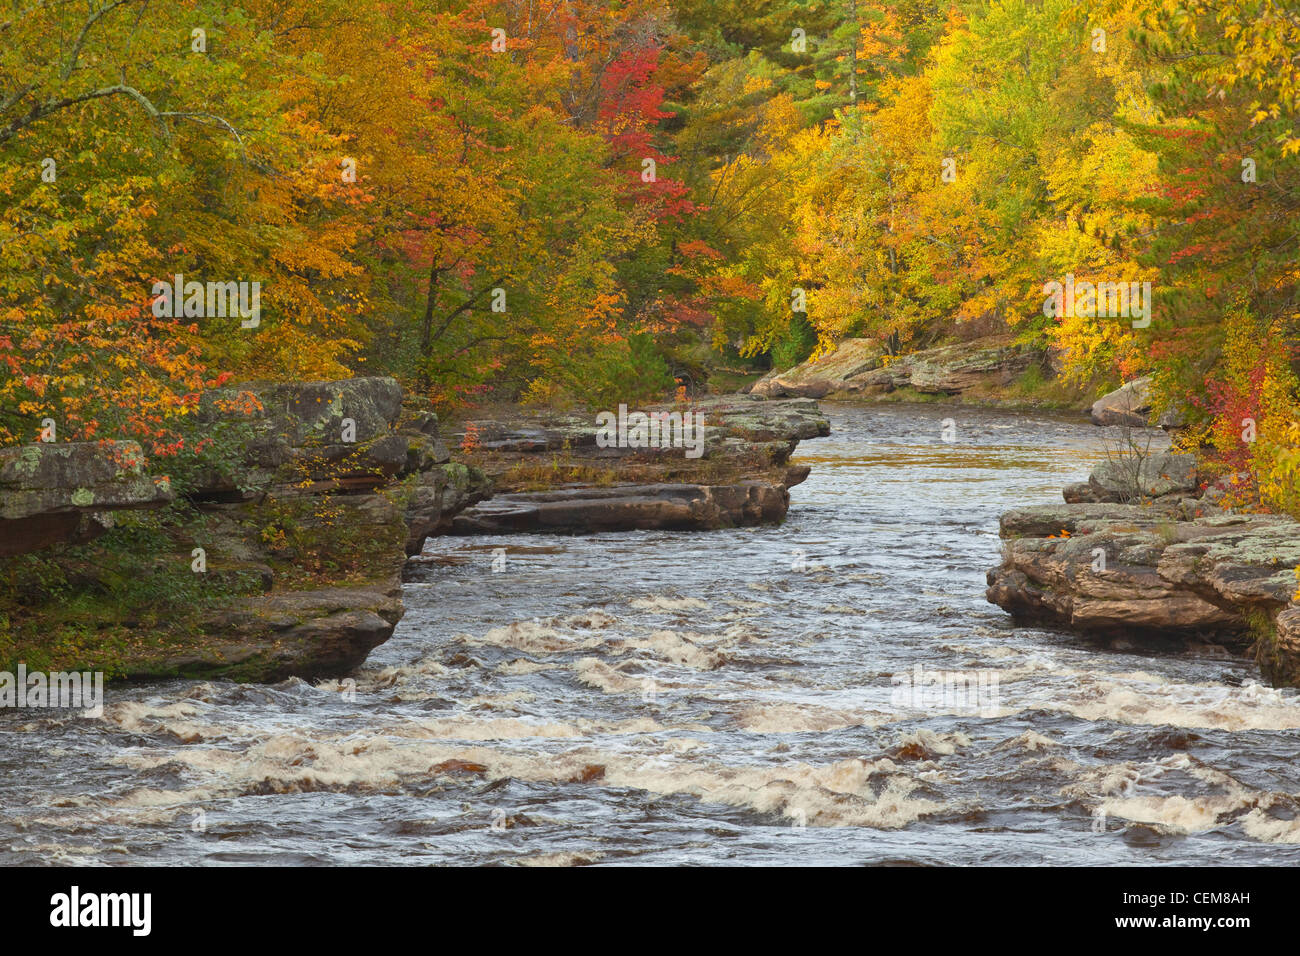 Autumn colors along the Kettle River at Banning Rapids in Banning State Park, Sandstone, Minnesota, USA Stock Photo